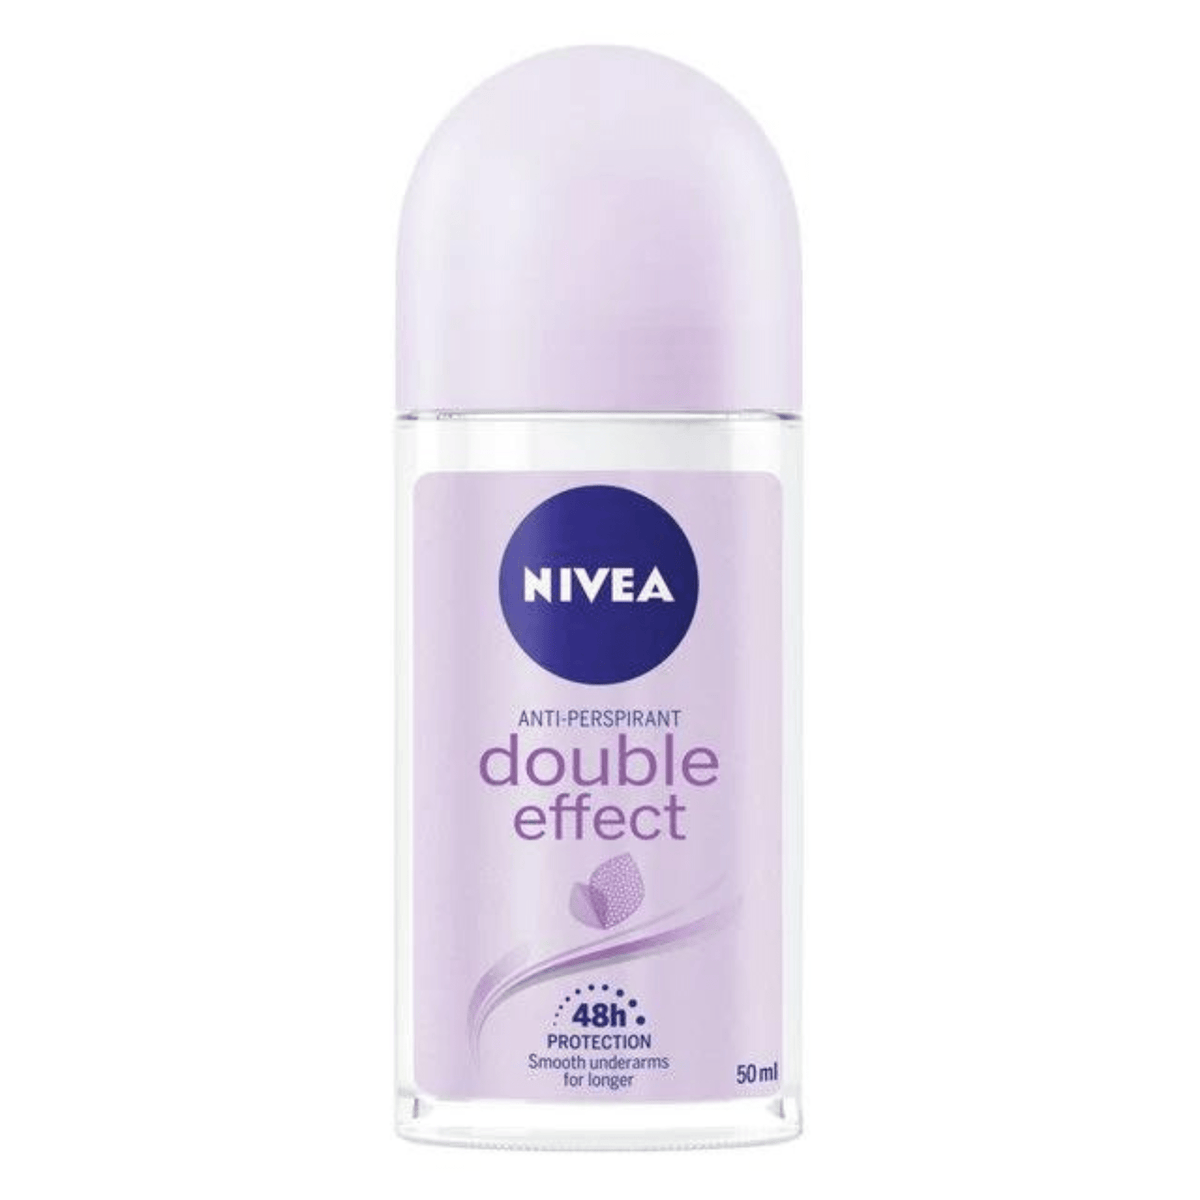 Primary Image of Nivea Double Effect Deodorant Roll On